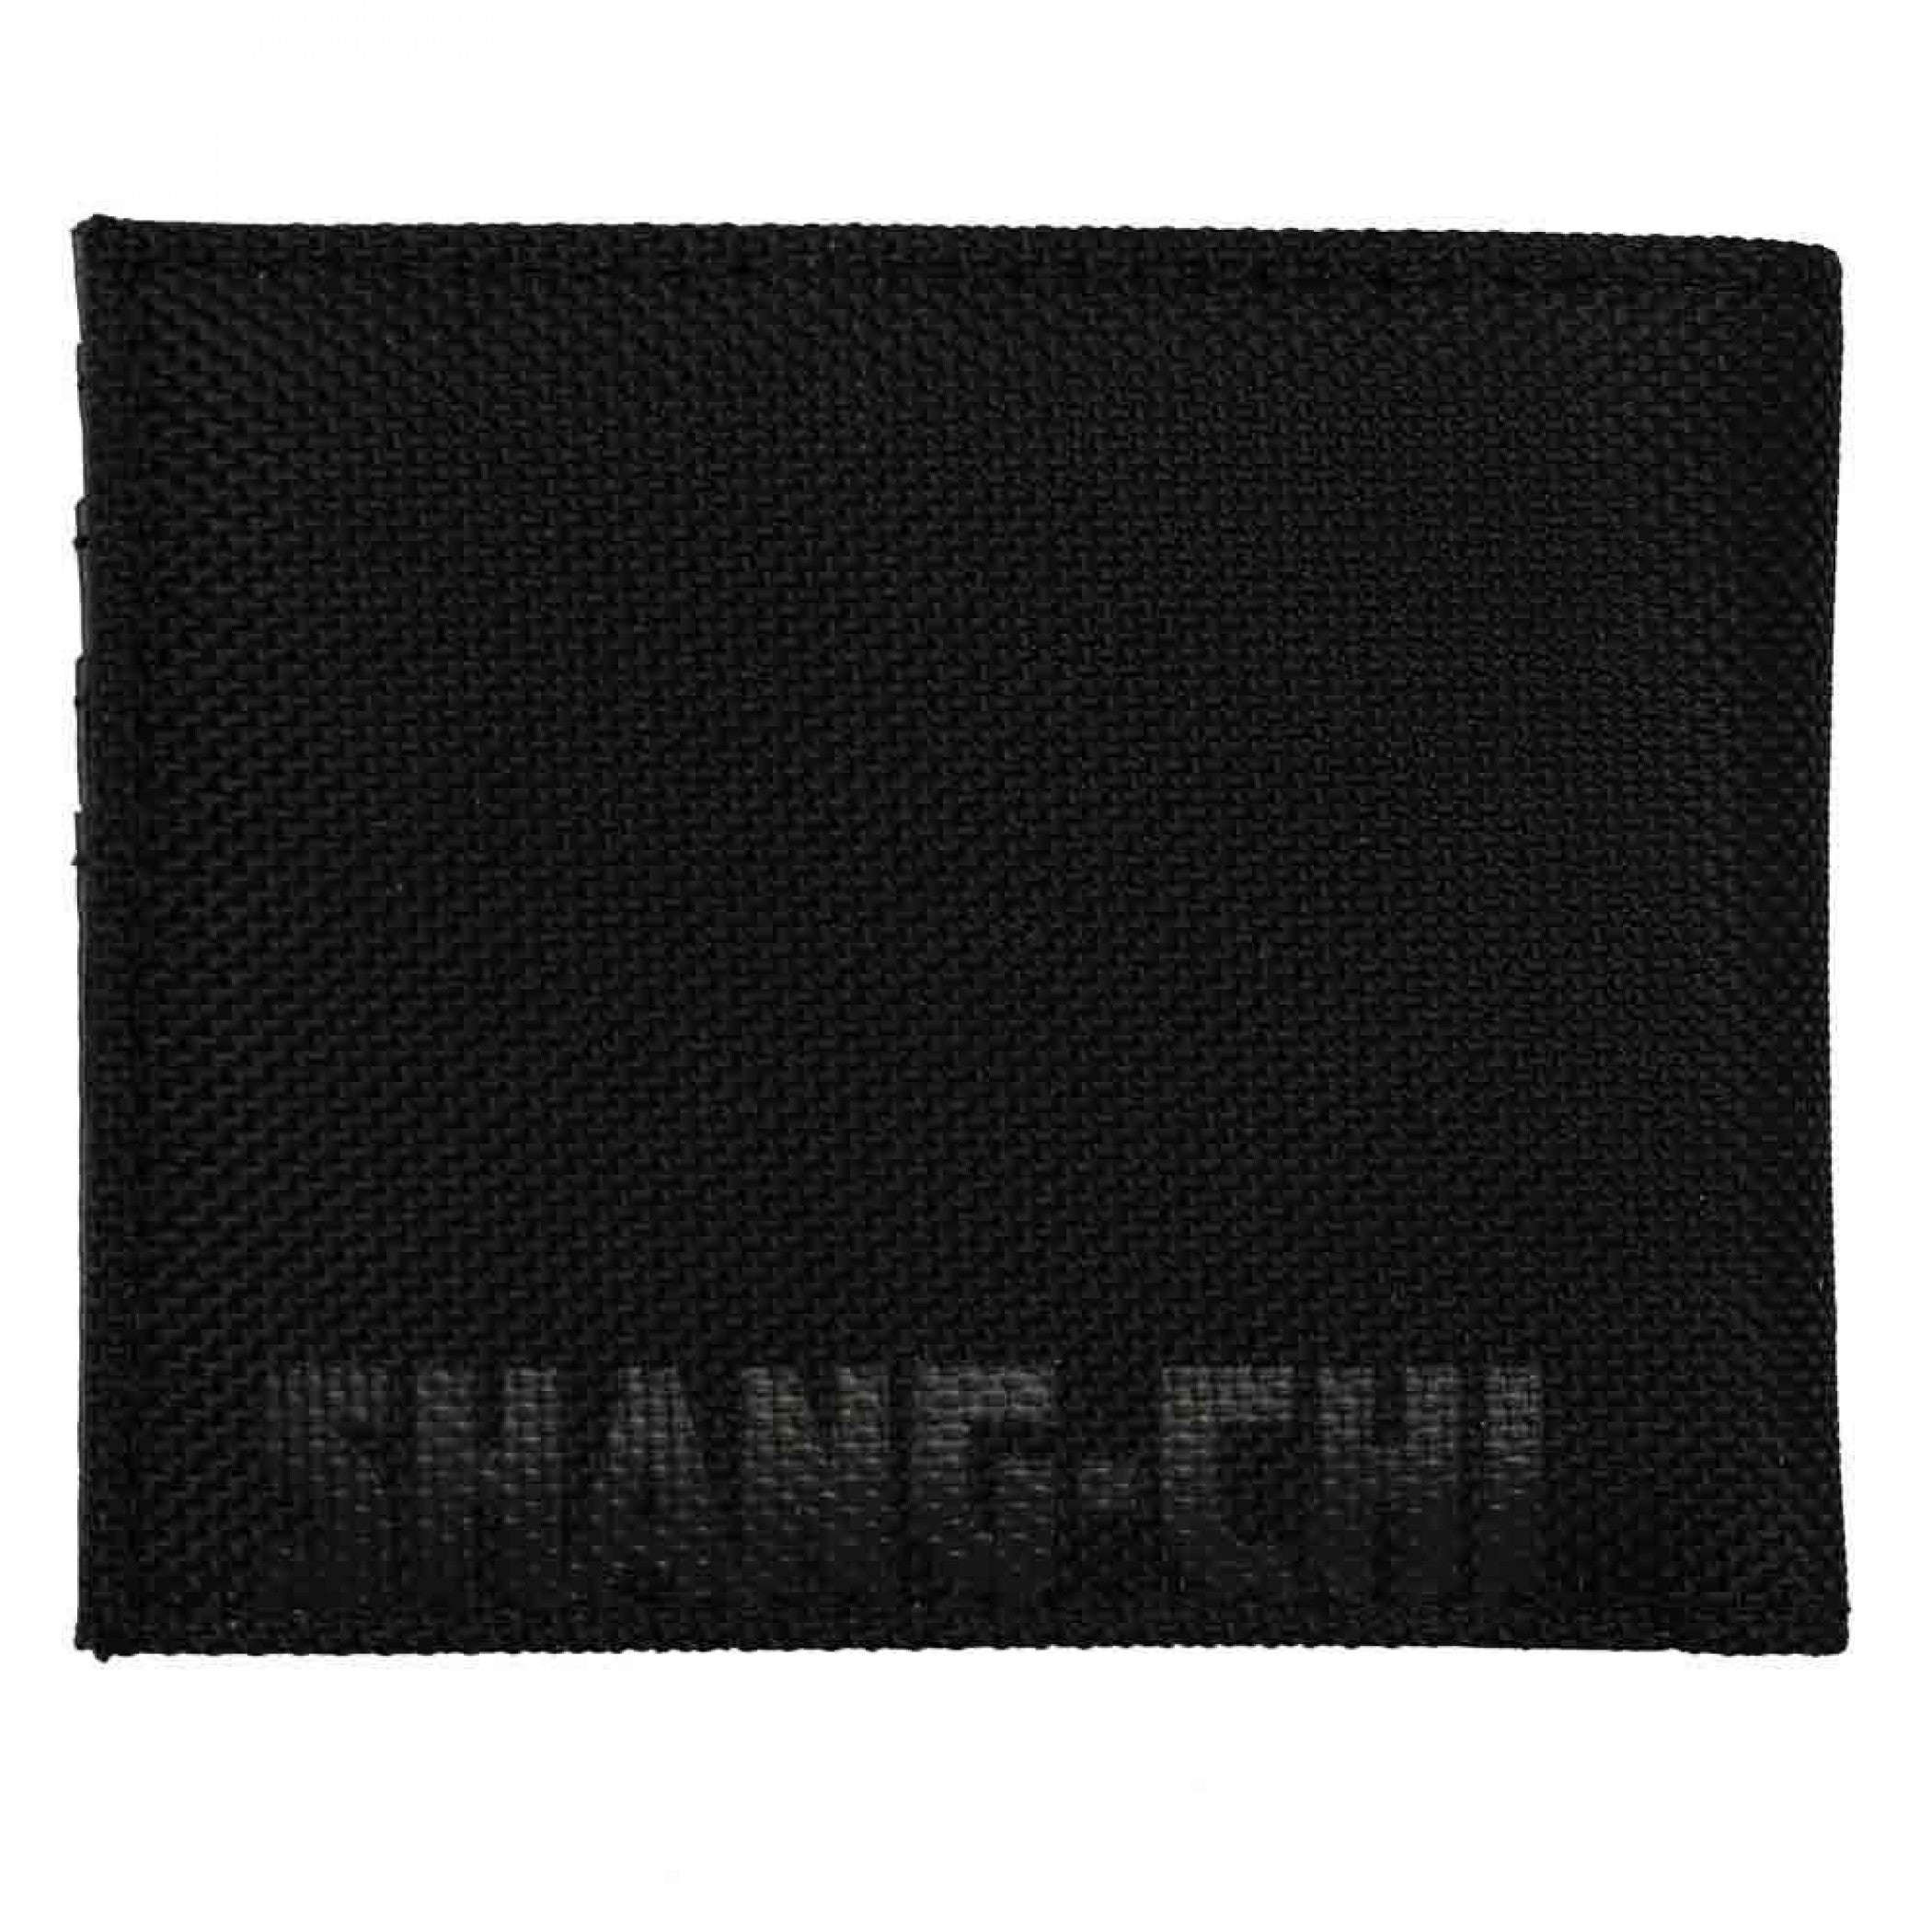 title:Shang-Chi and the Legend of the Ten Rings Marvel Comics Bi-Fold Wallet;color:Black